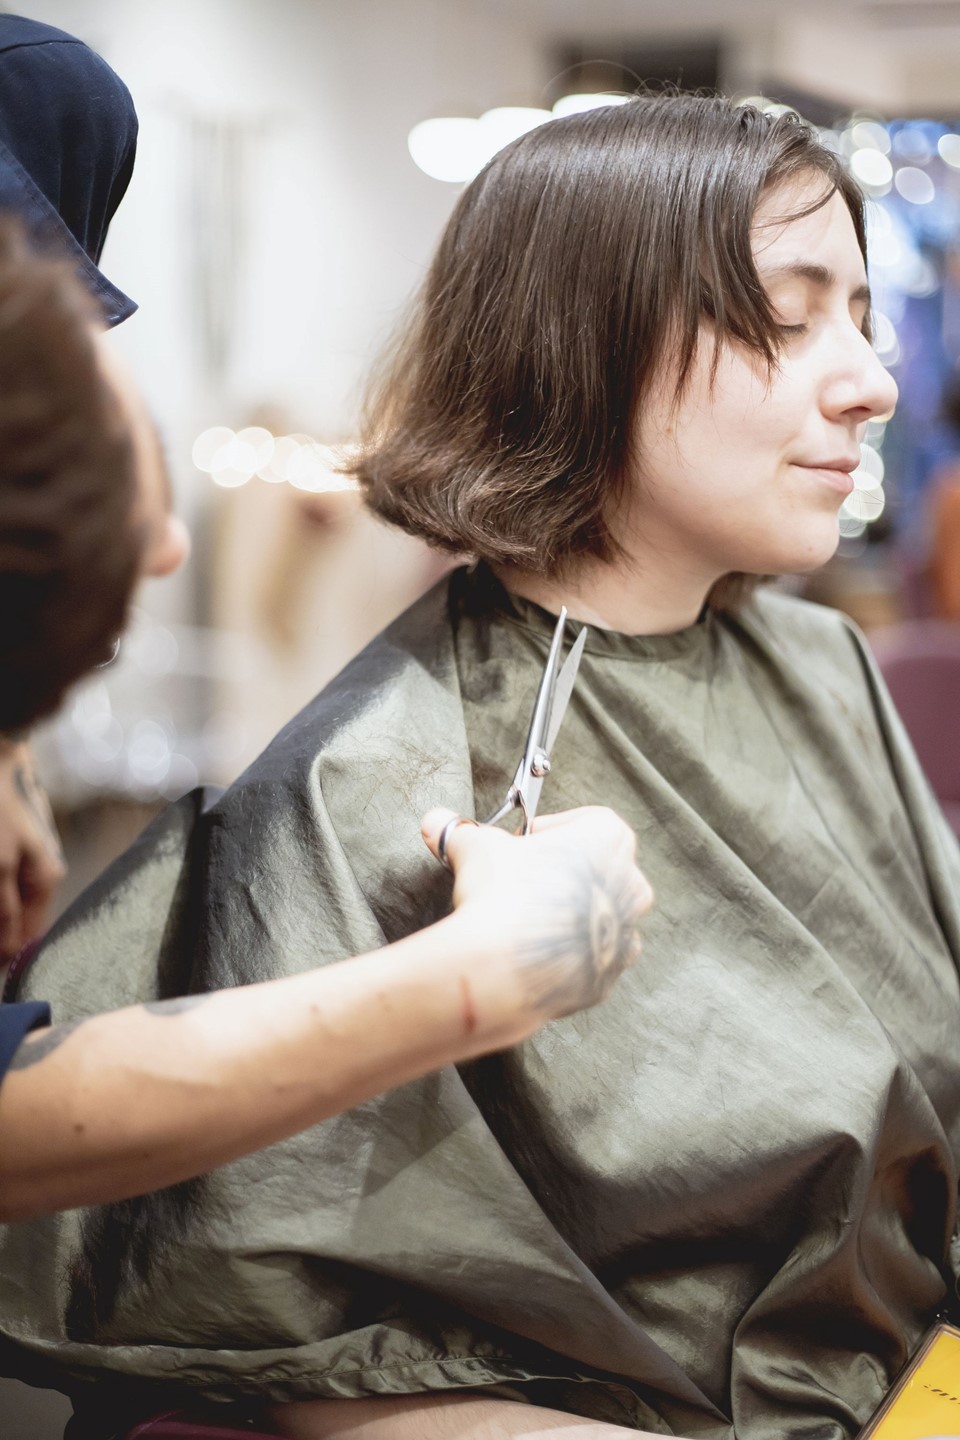 Intuitive dry cutting' is the new trend here to change haircuts forever |  Dazed